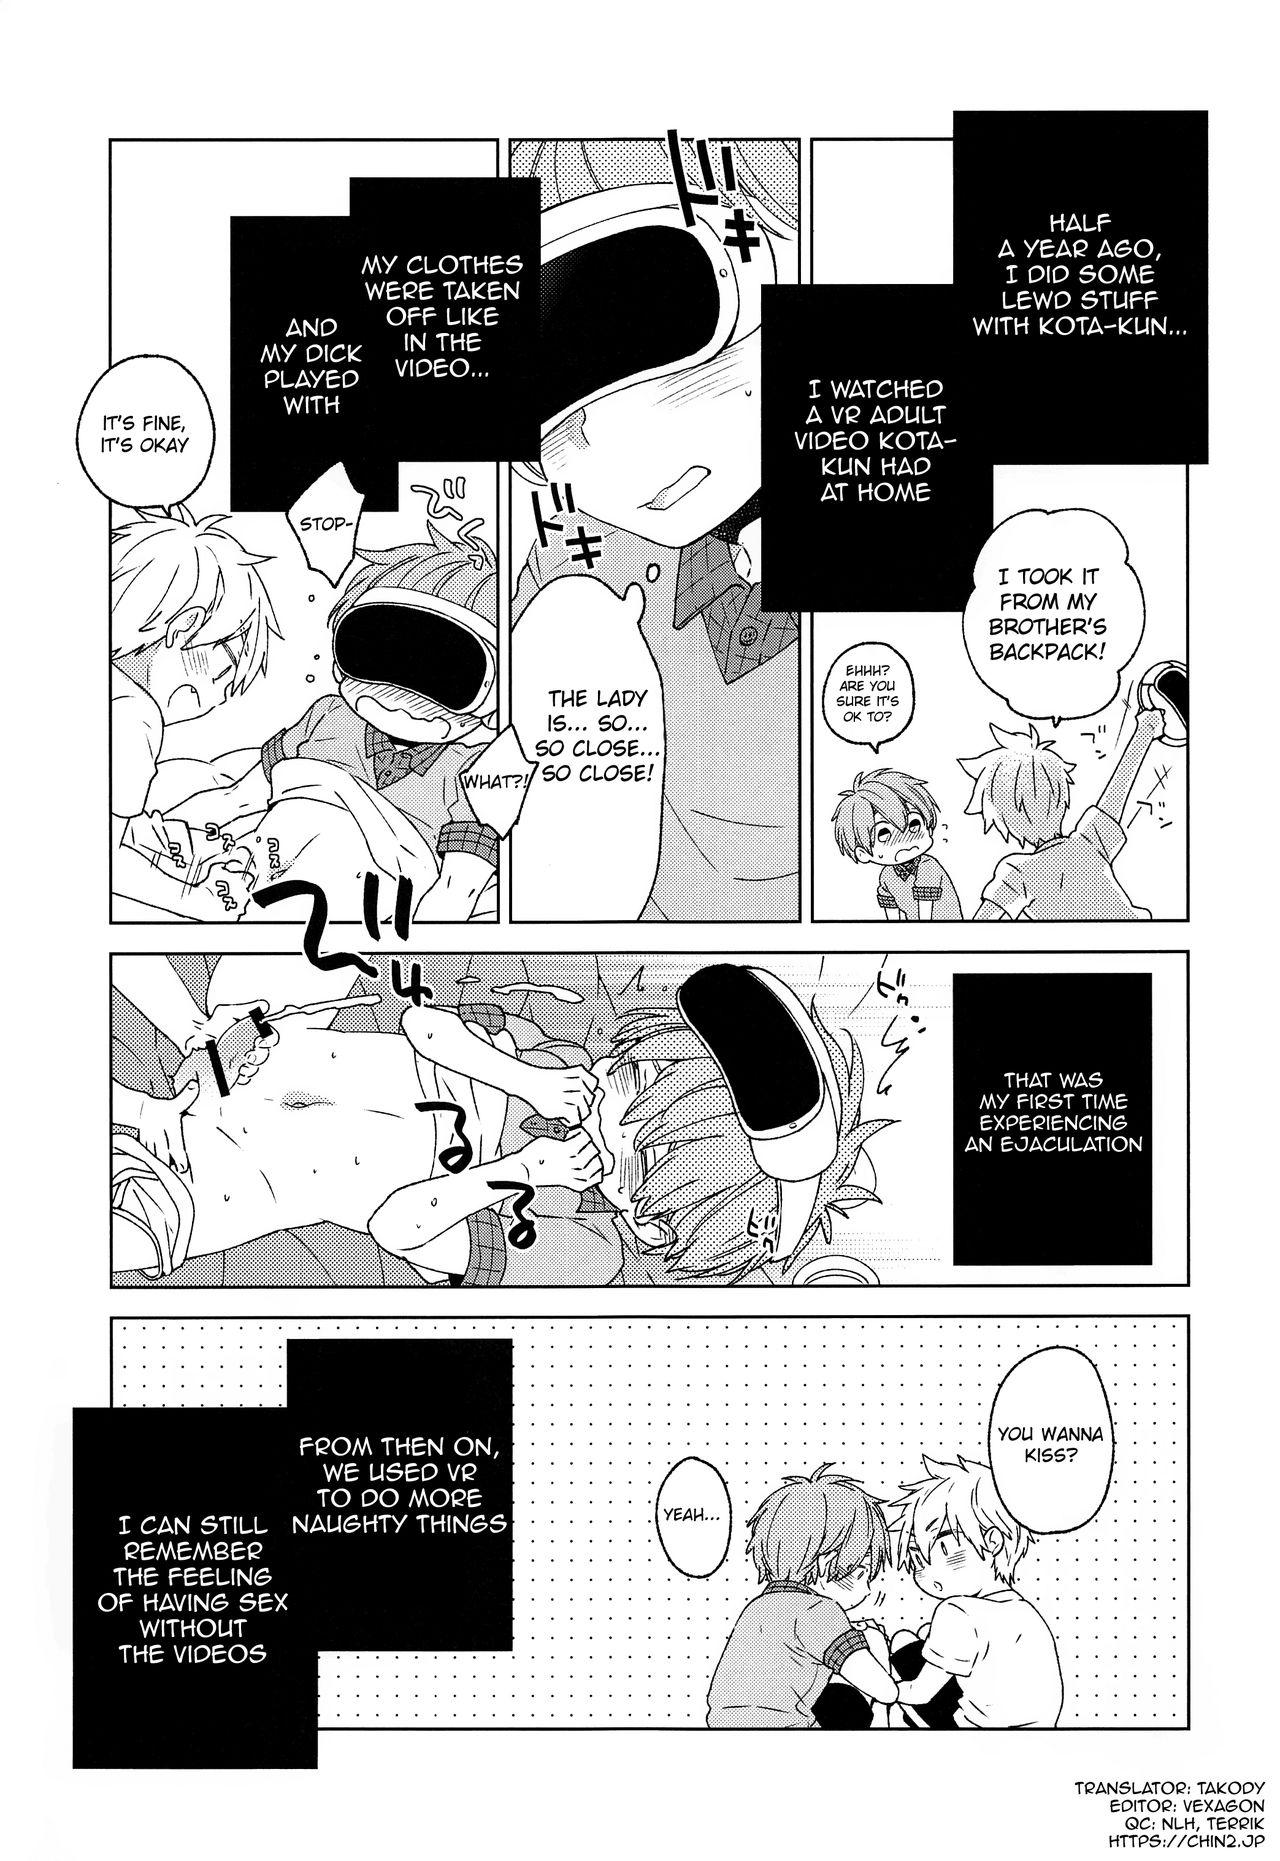 Oiled Tomodachi to Suru no wa Warui Koto? | Is it wrong to have sex with my friend? - Original Slapping - Page 4